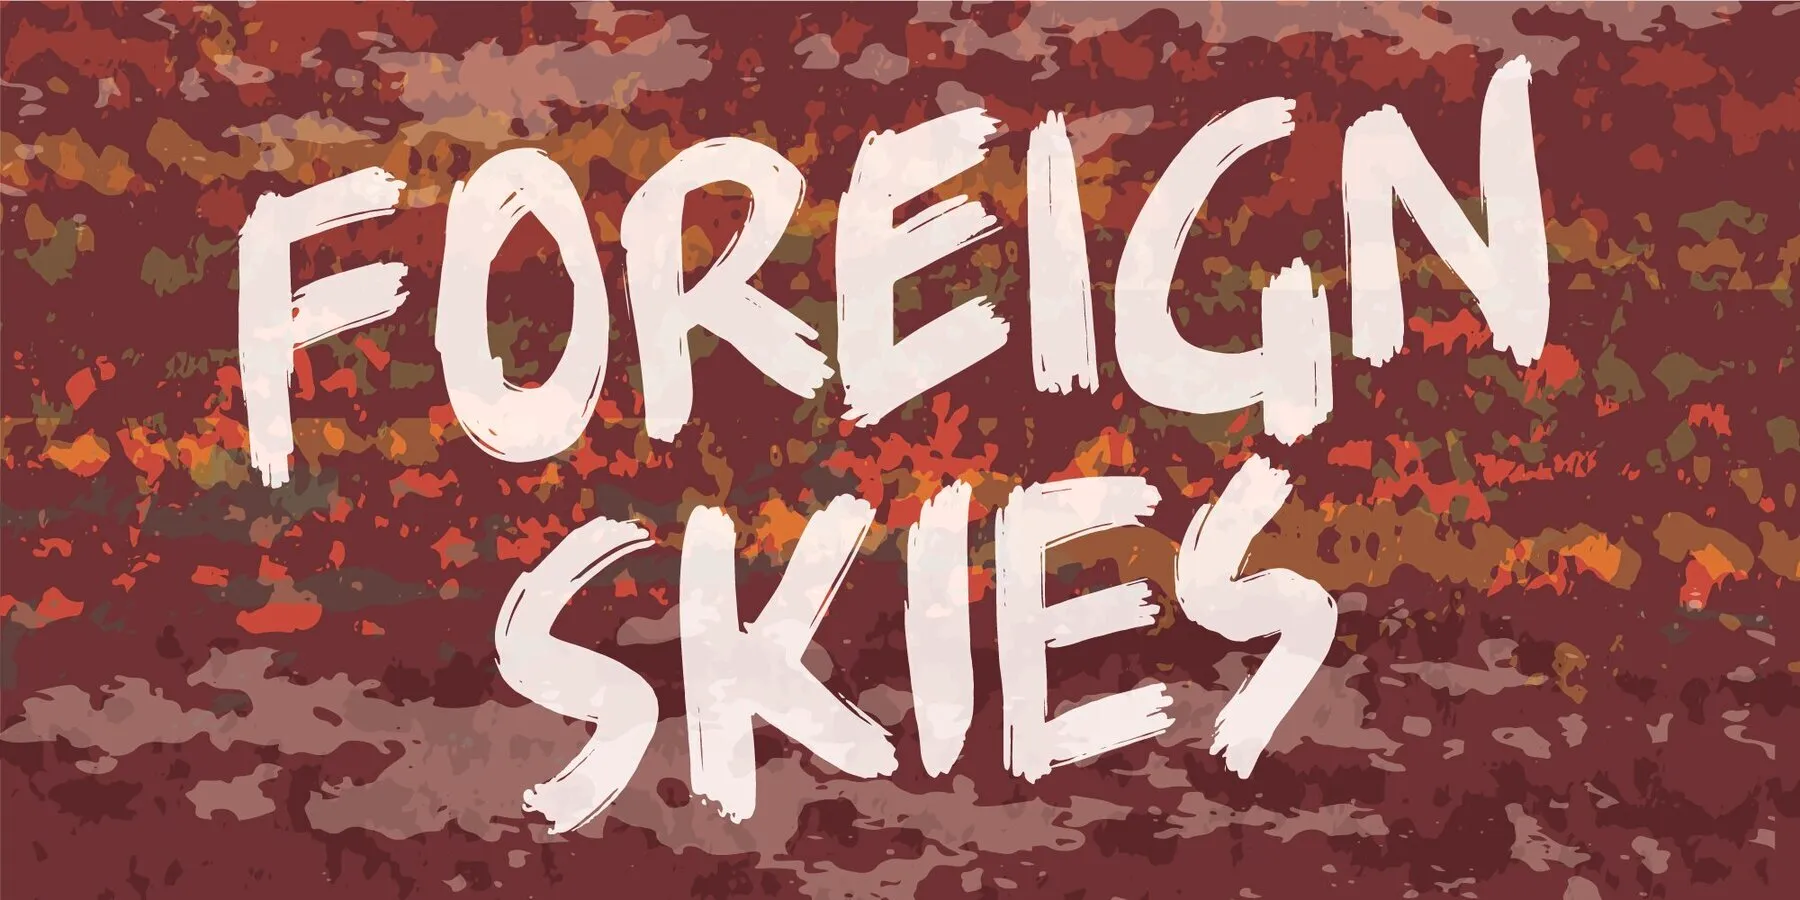 Foreign Skies